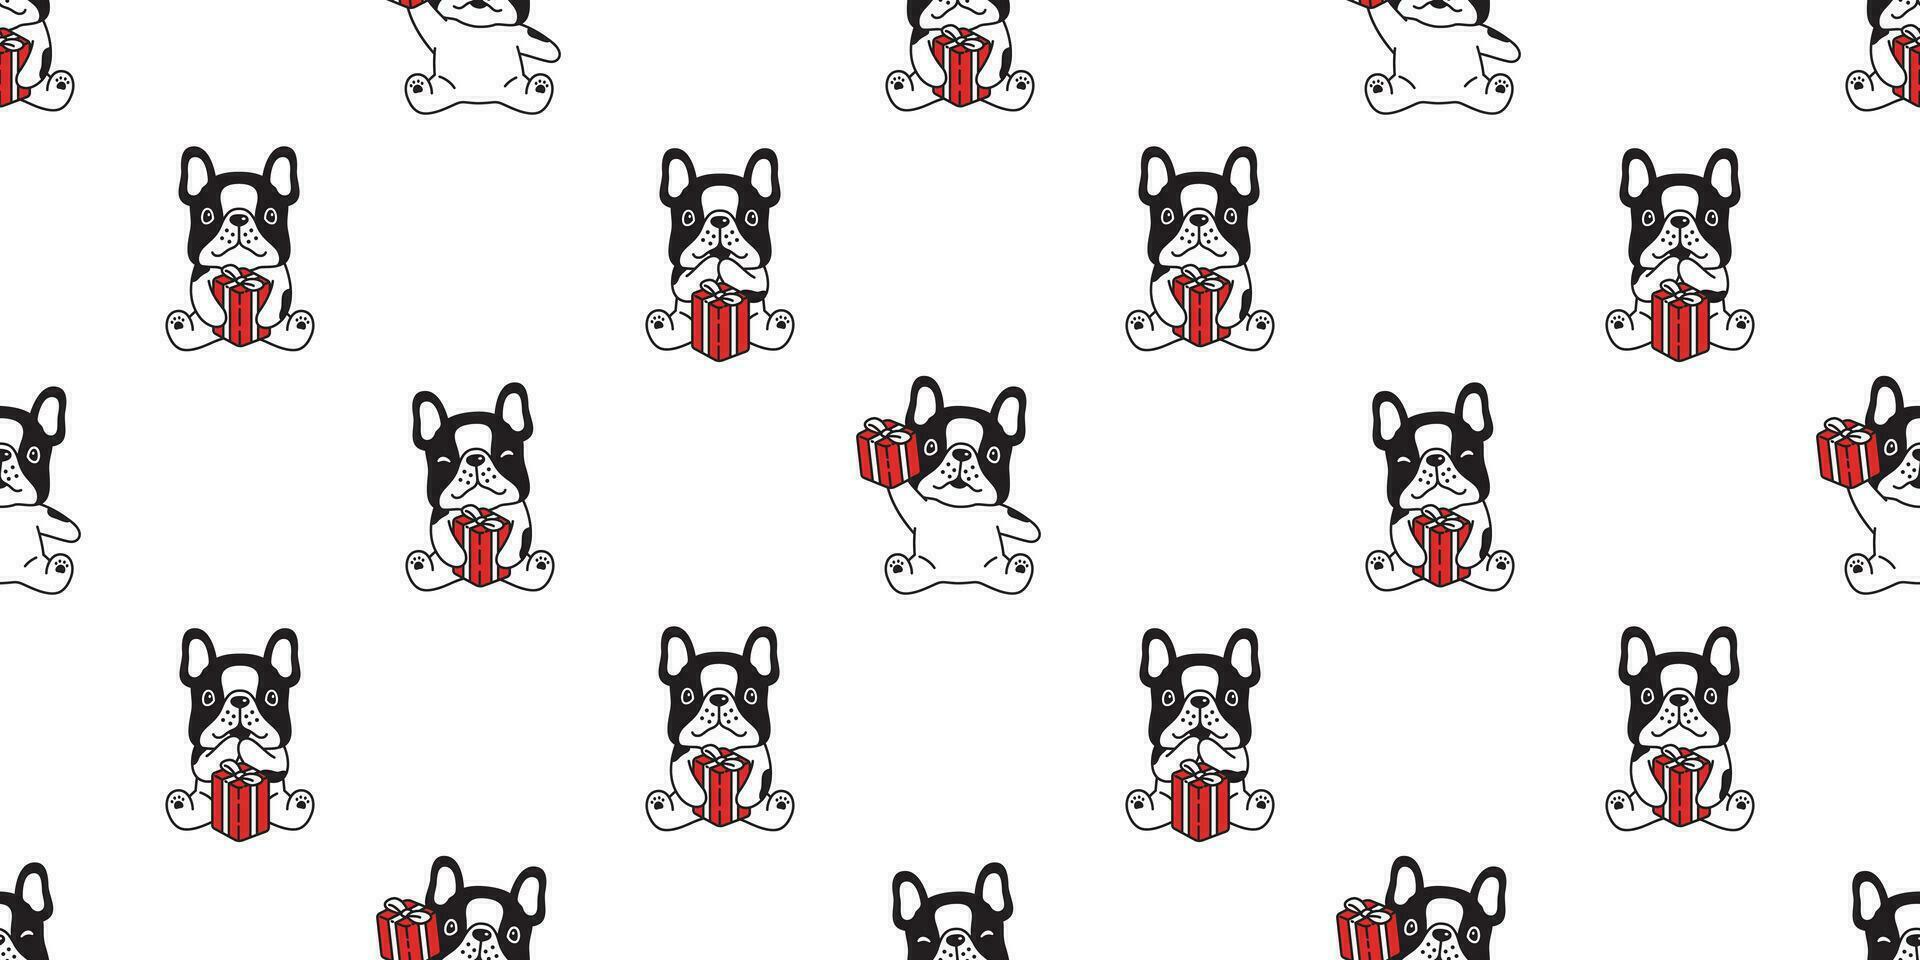 dog seamless pattern Birthday gift box Christmas vector french bulldog Santa Claus hat scarf isolated cartoon repeat background tile wallpaper illustration design